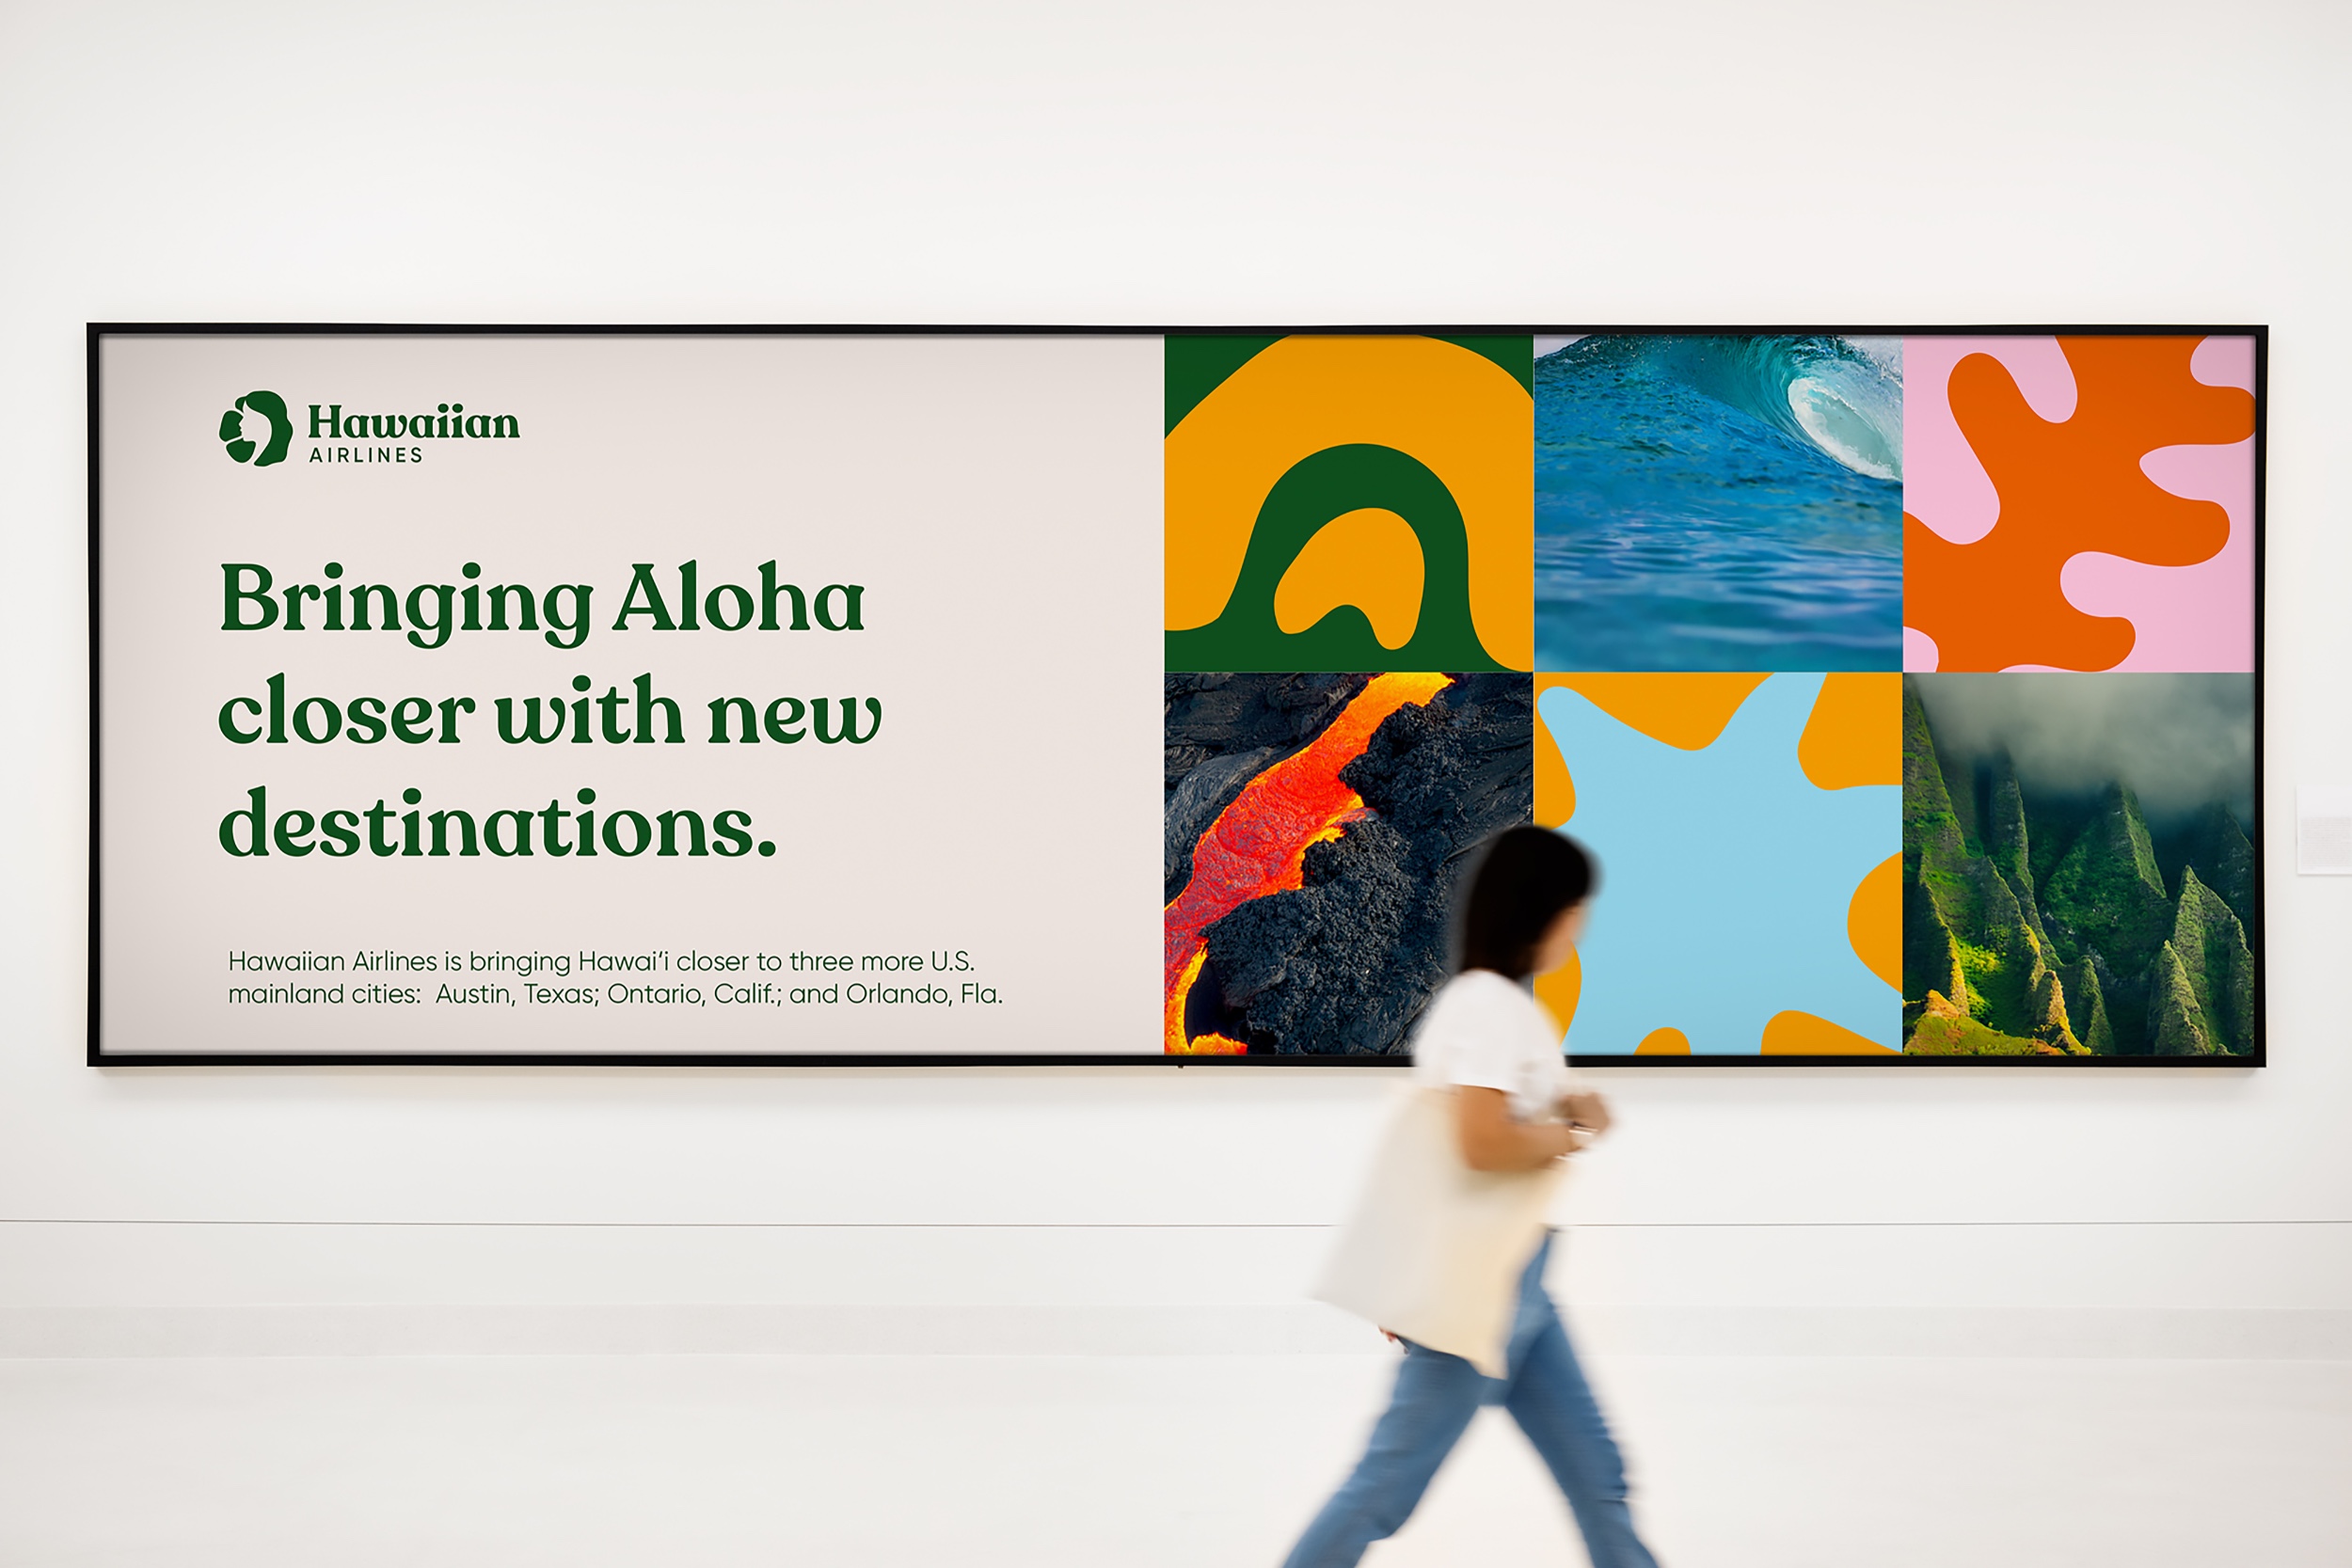 Student Brand Design for Hawaiian Airlines